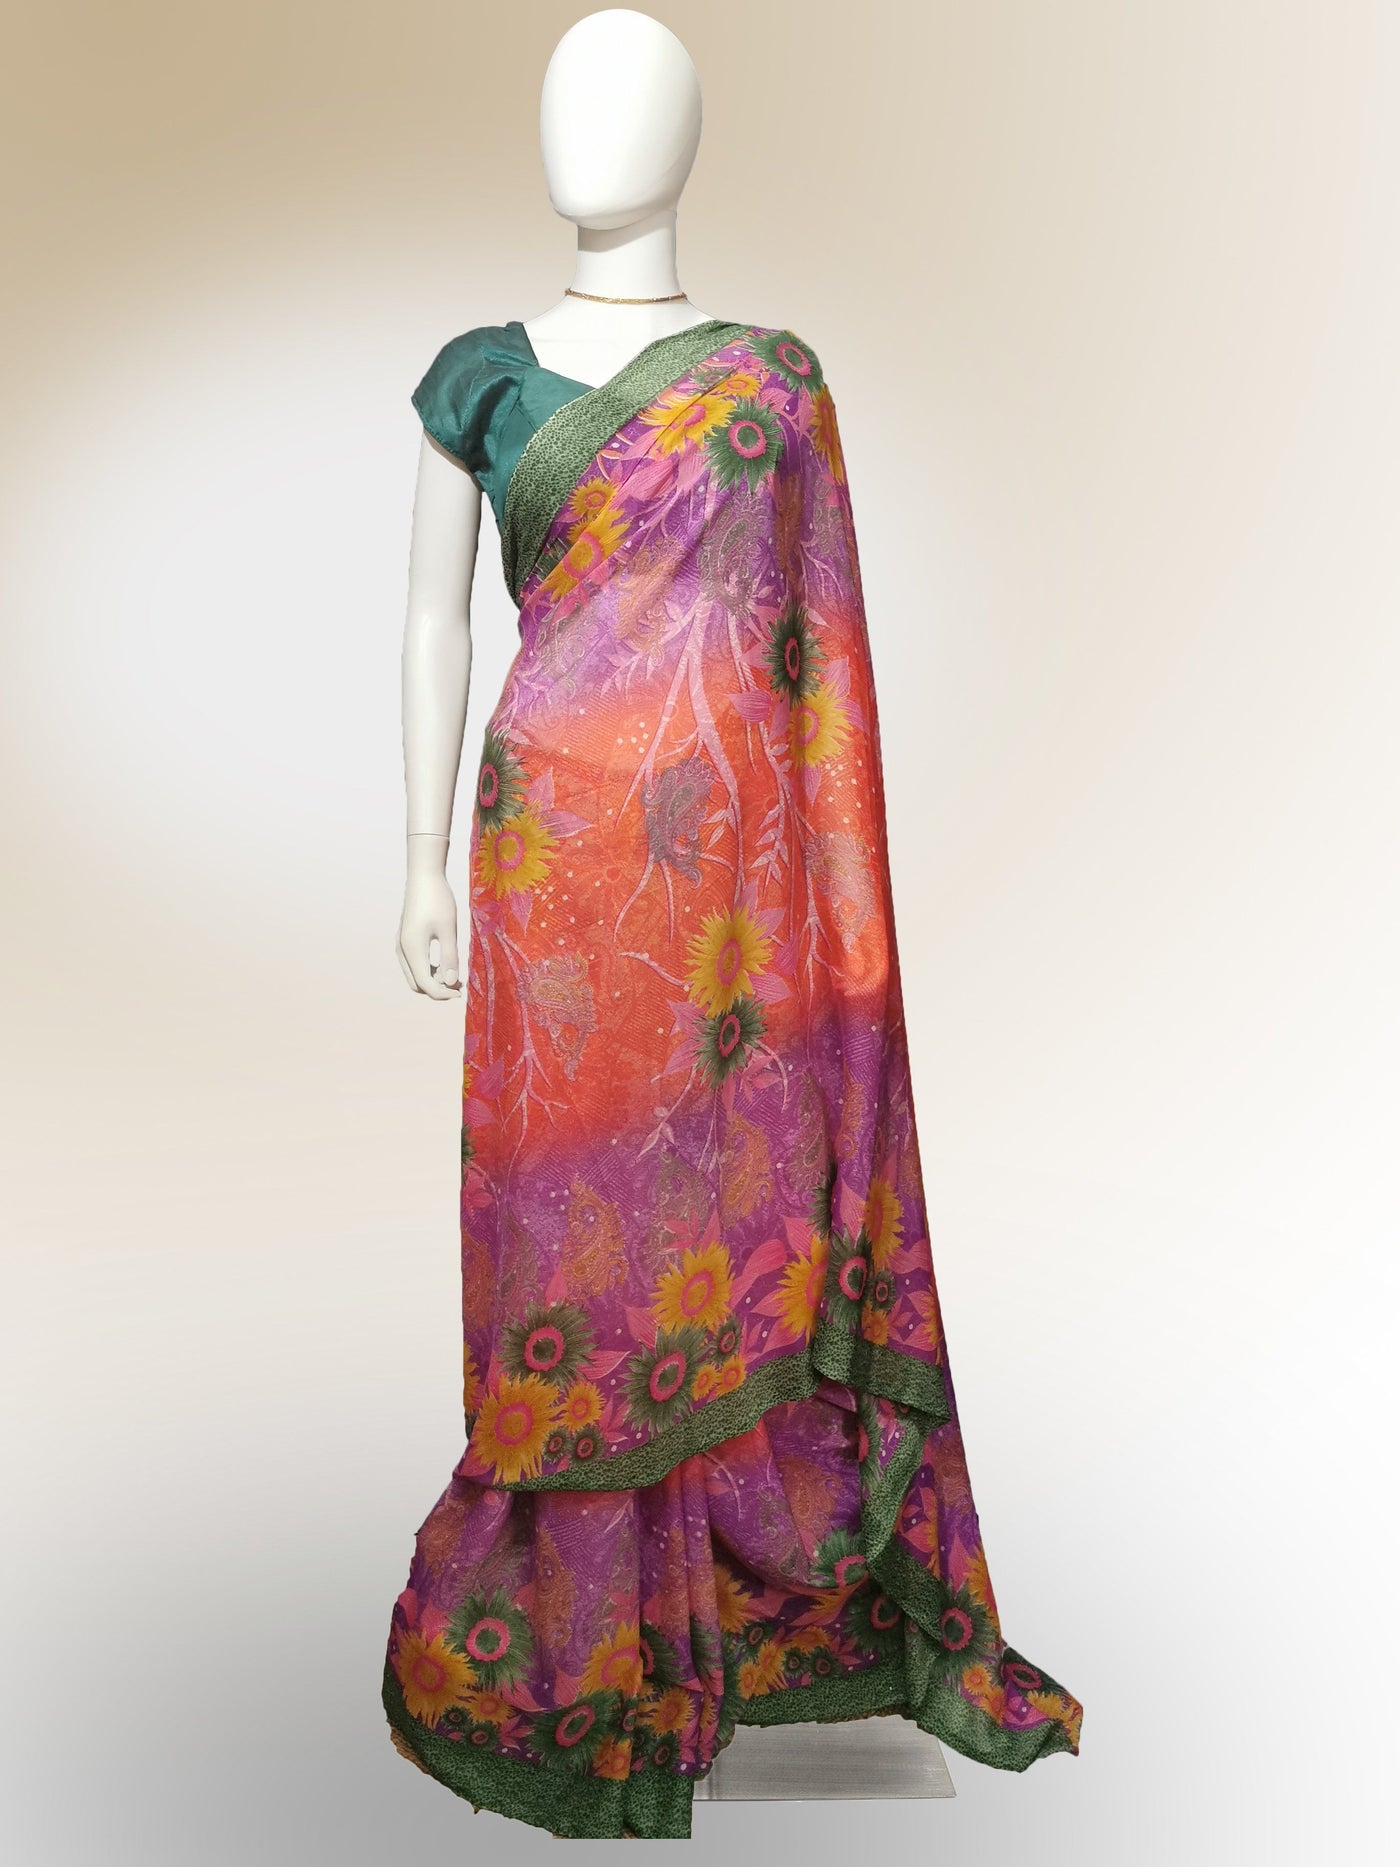 Saree in Tropical Floral Motif Indian Clothing in Denver, CO, Aurora, CO, Boulder, CO, Fort Collins, CO, Colorado Springs, CO, Parker, CO, Highlands Ranch, CO, Cherry Creek, CO, Centennial, CO, and Longmont, CO. NATIONWIDE SHIPPING USA- India Fashion X